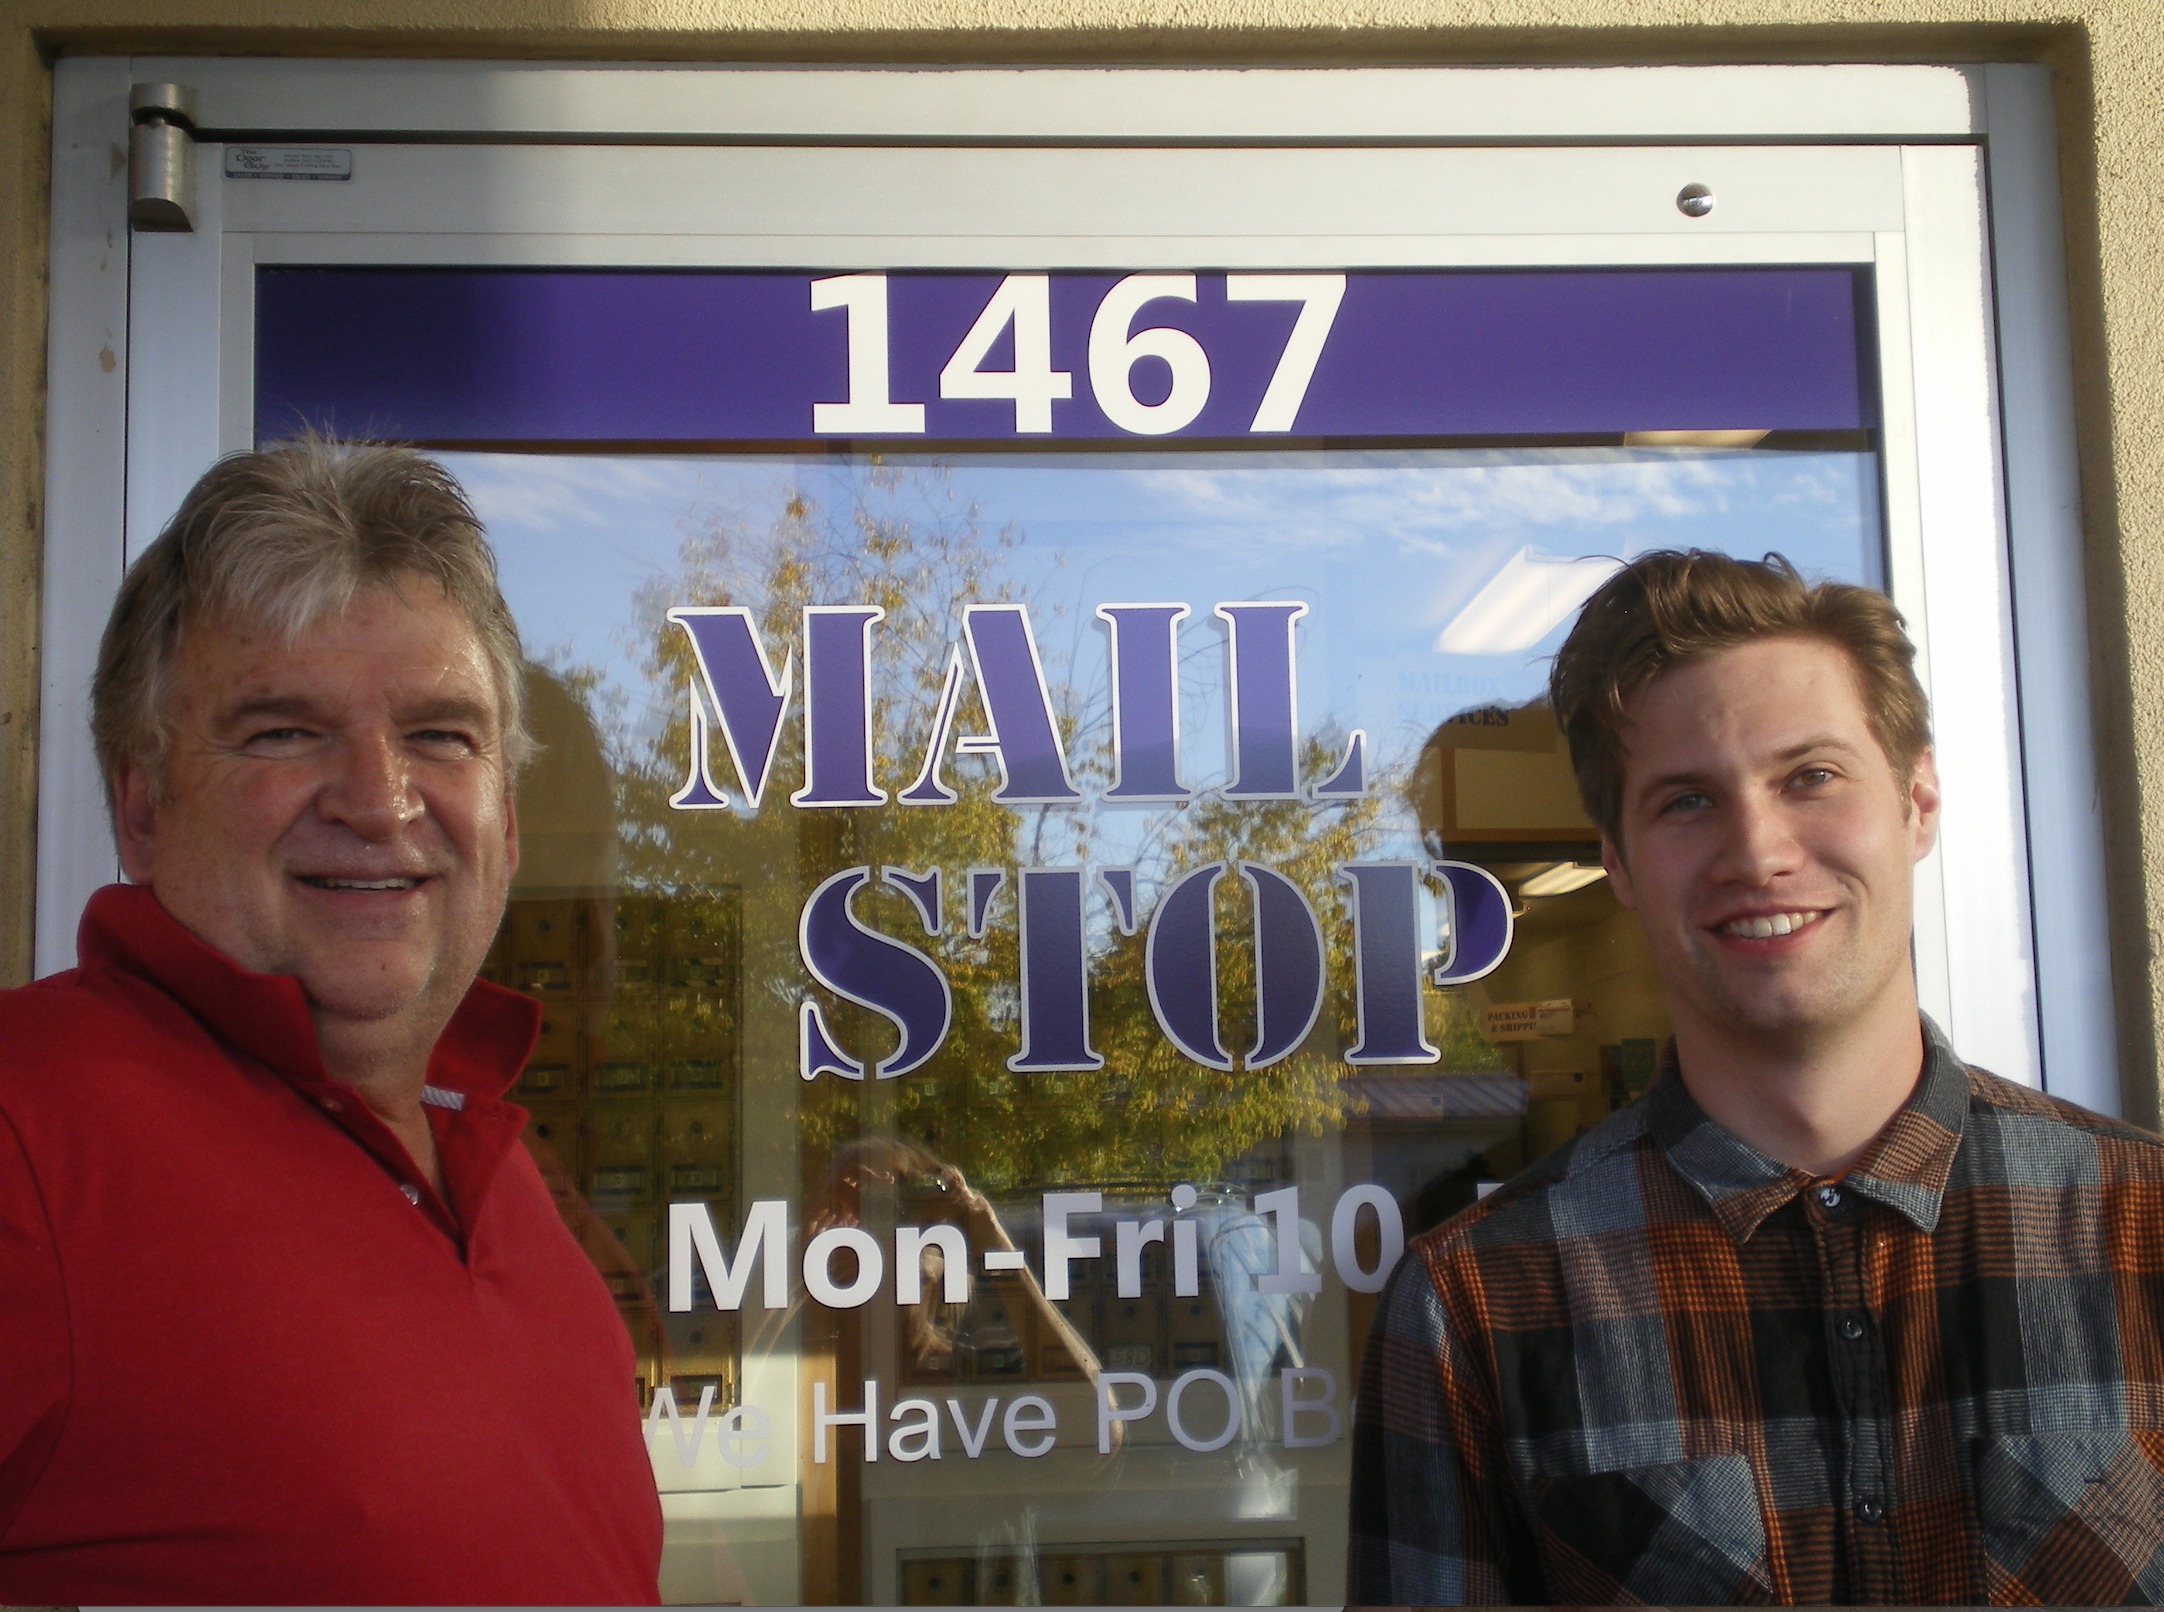 The Mail Stop